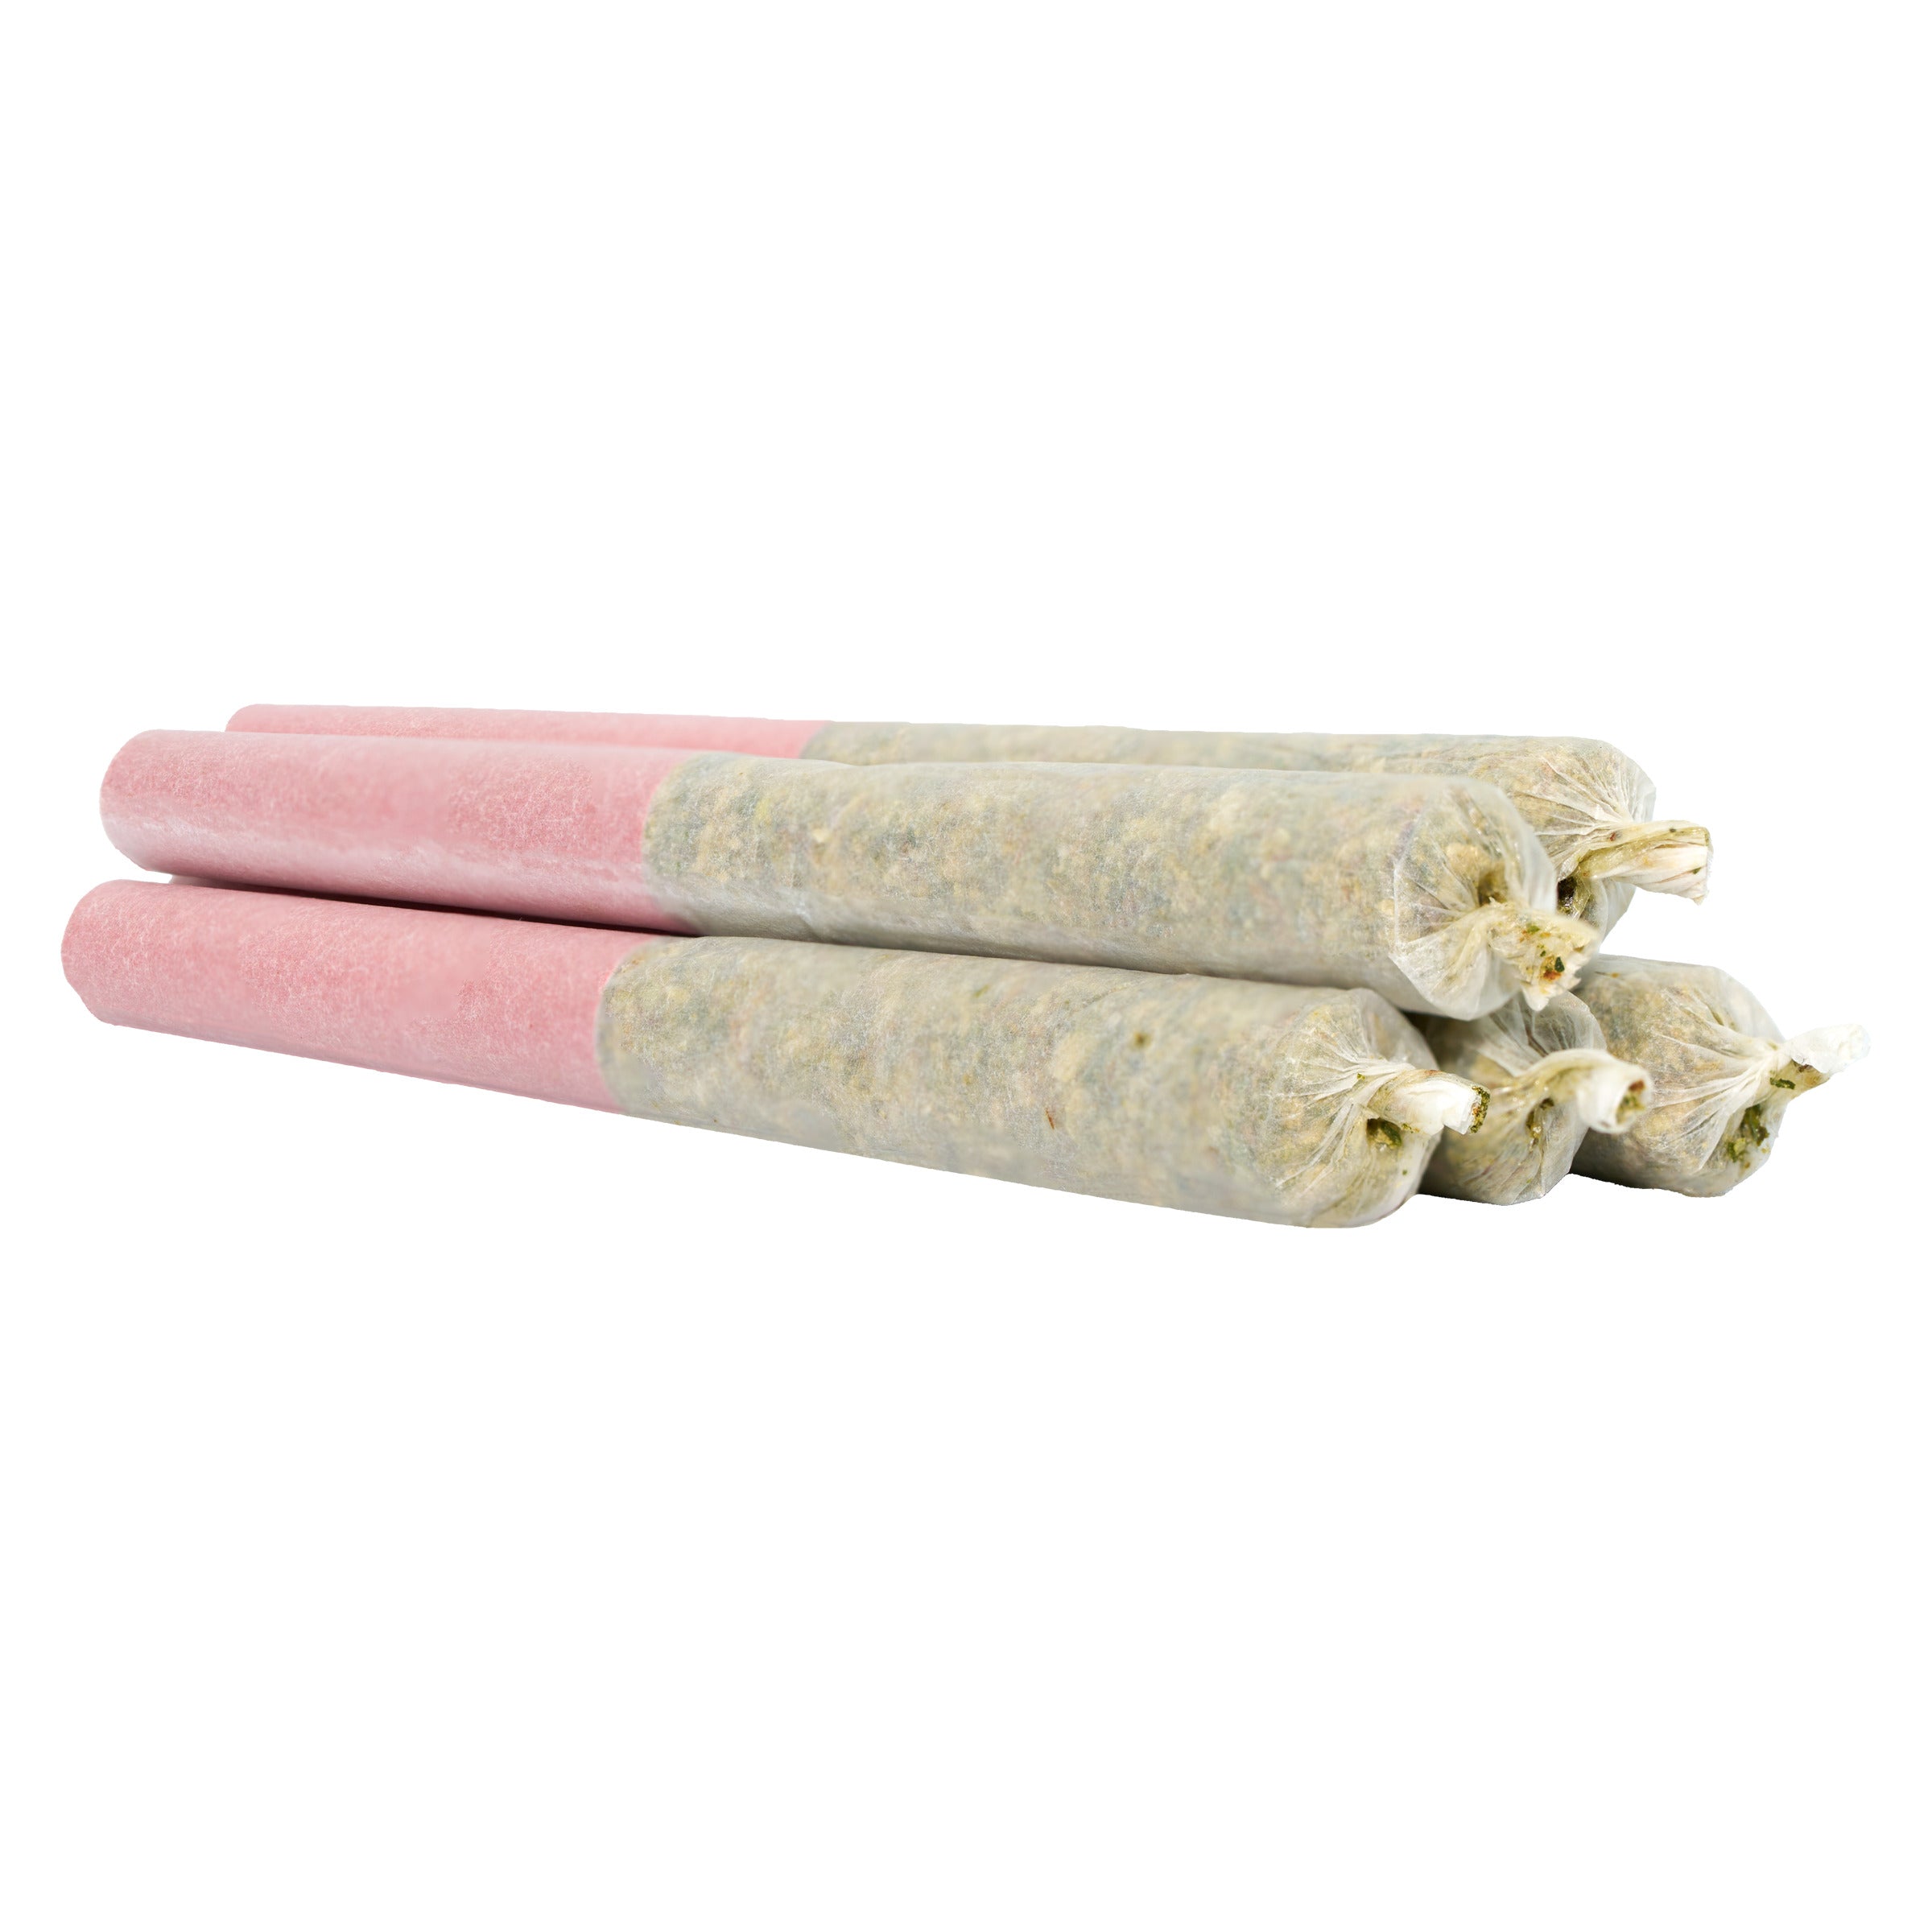 GOOD SUPPLY JUICED COSMIC CHERRY (S) INF PRE-ROLL - 0.5G X 5